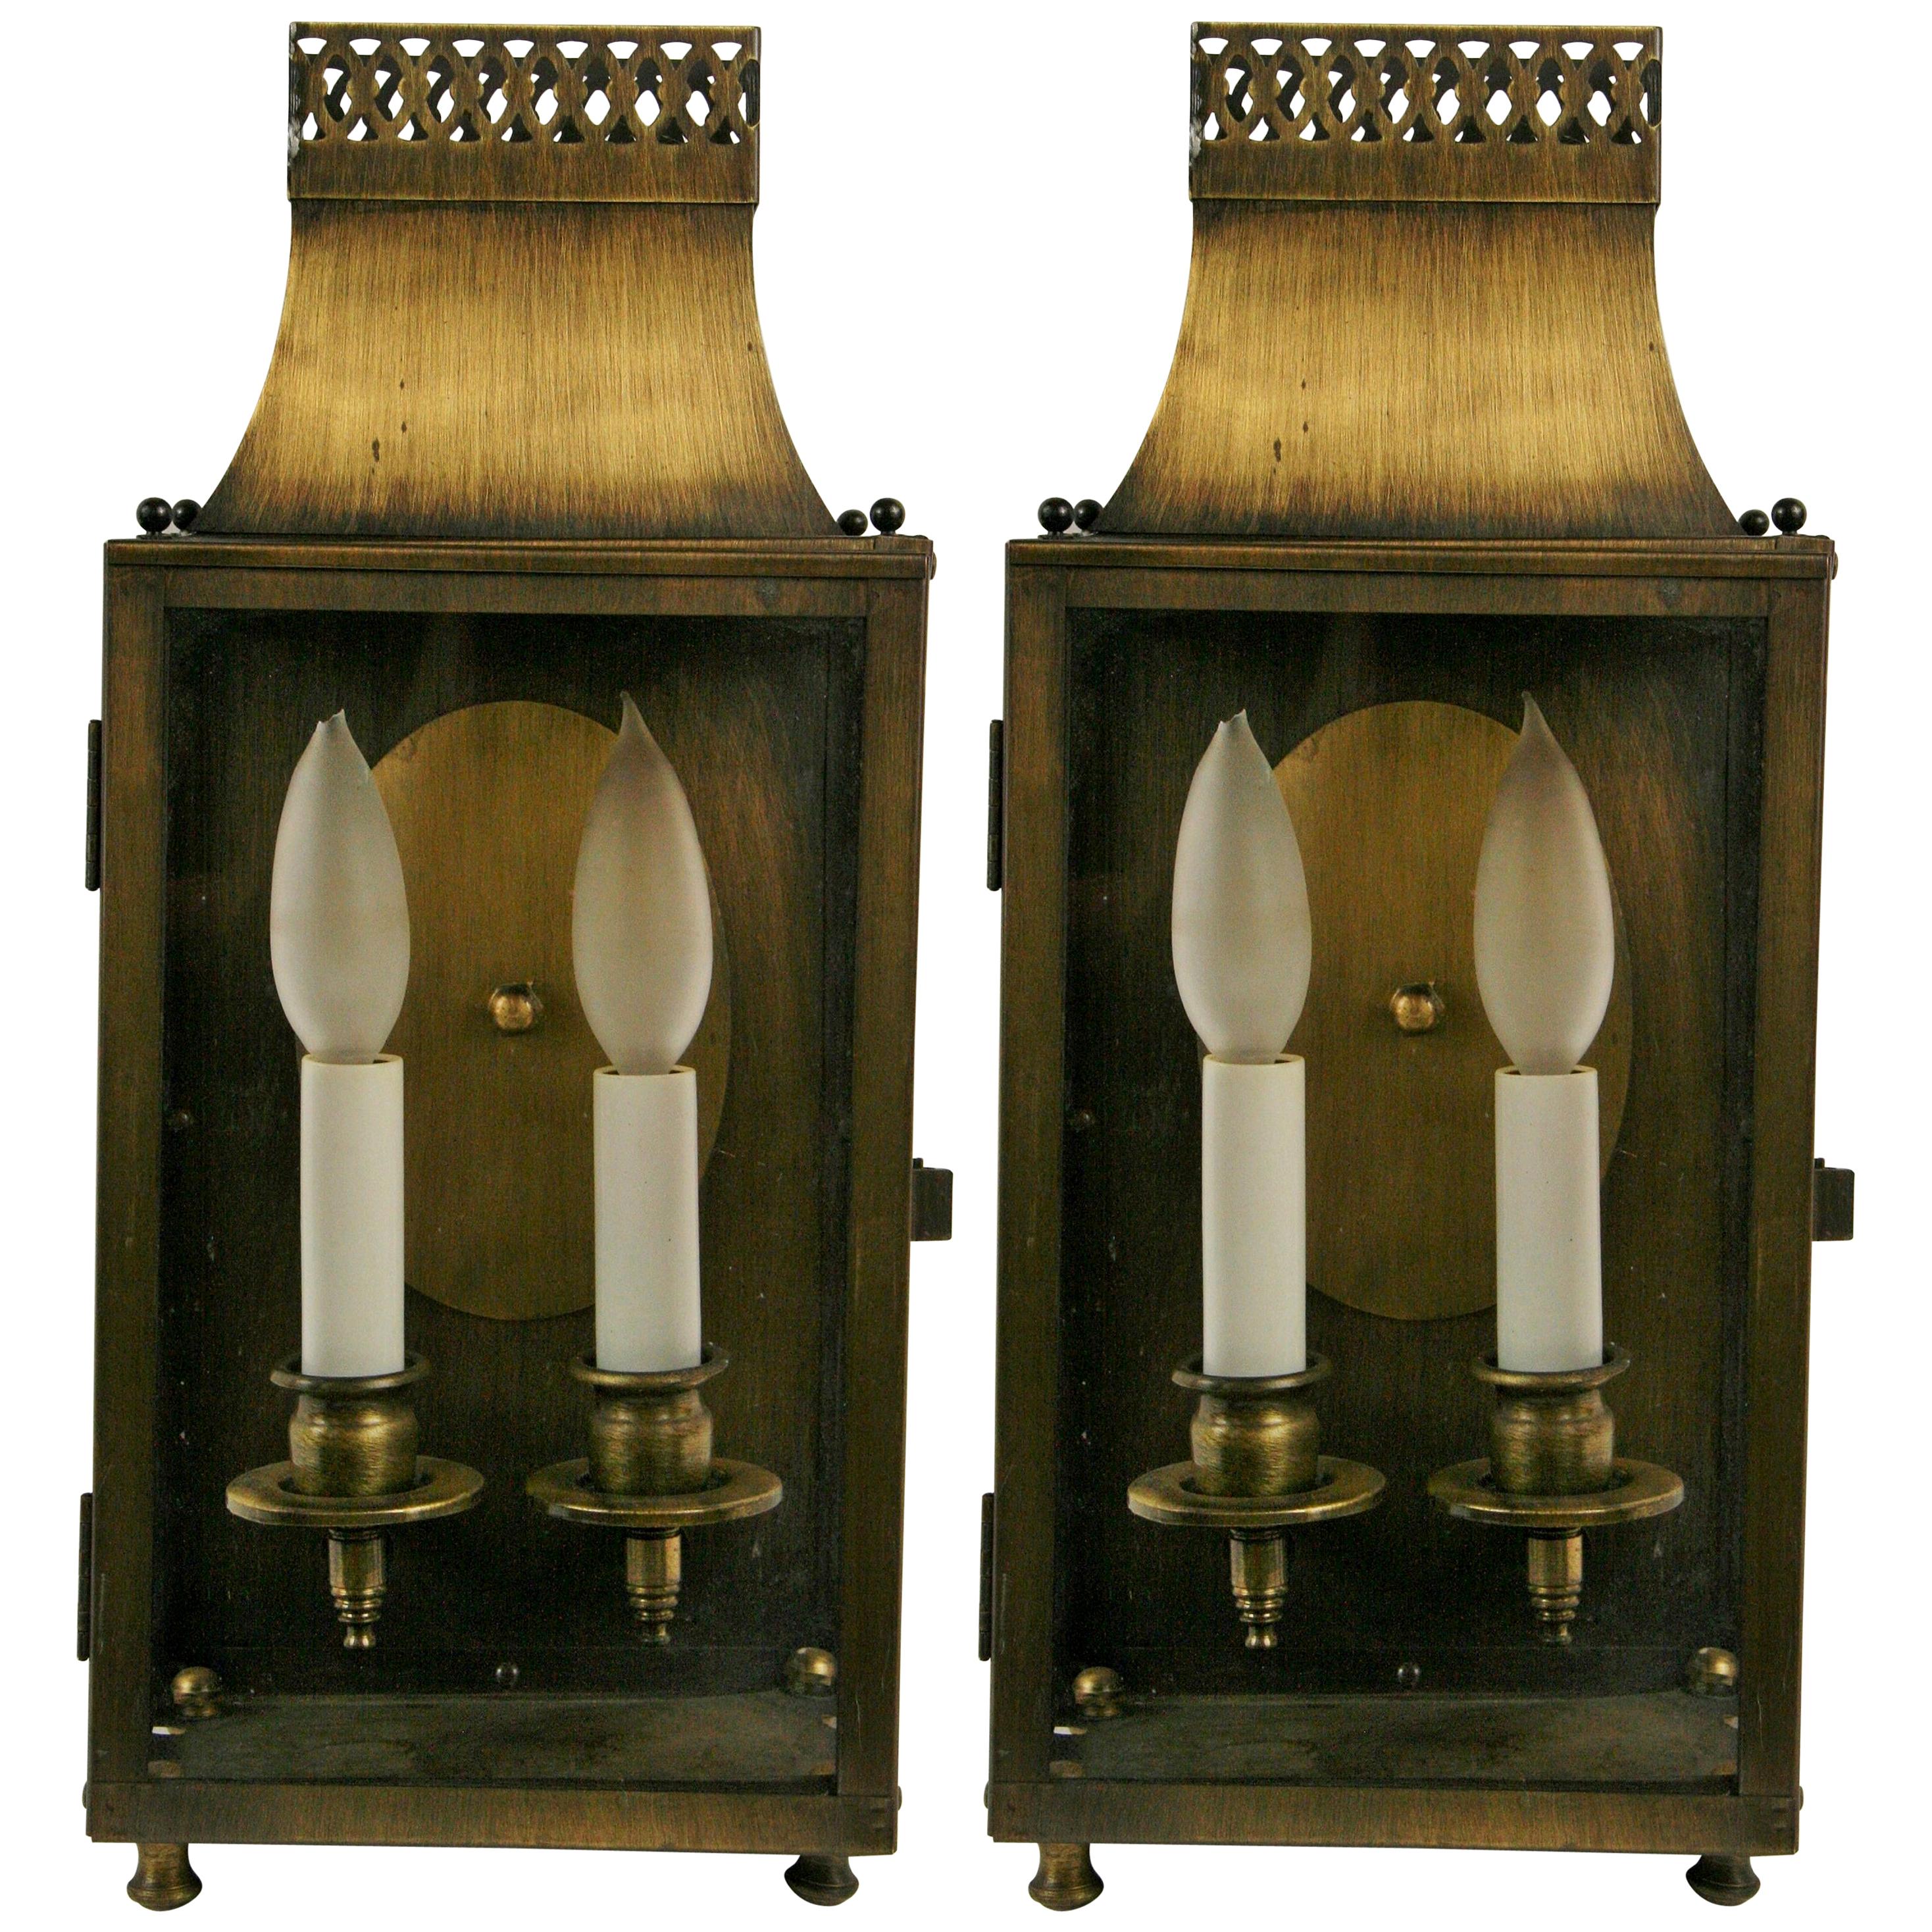 #2-1810a, a pair of patined brass-clear glass panels pagoda shaped wall sconces. Two internal light.
Candelabra base 60 W bulb.